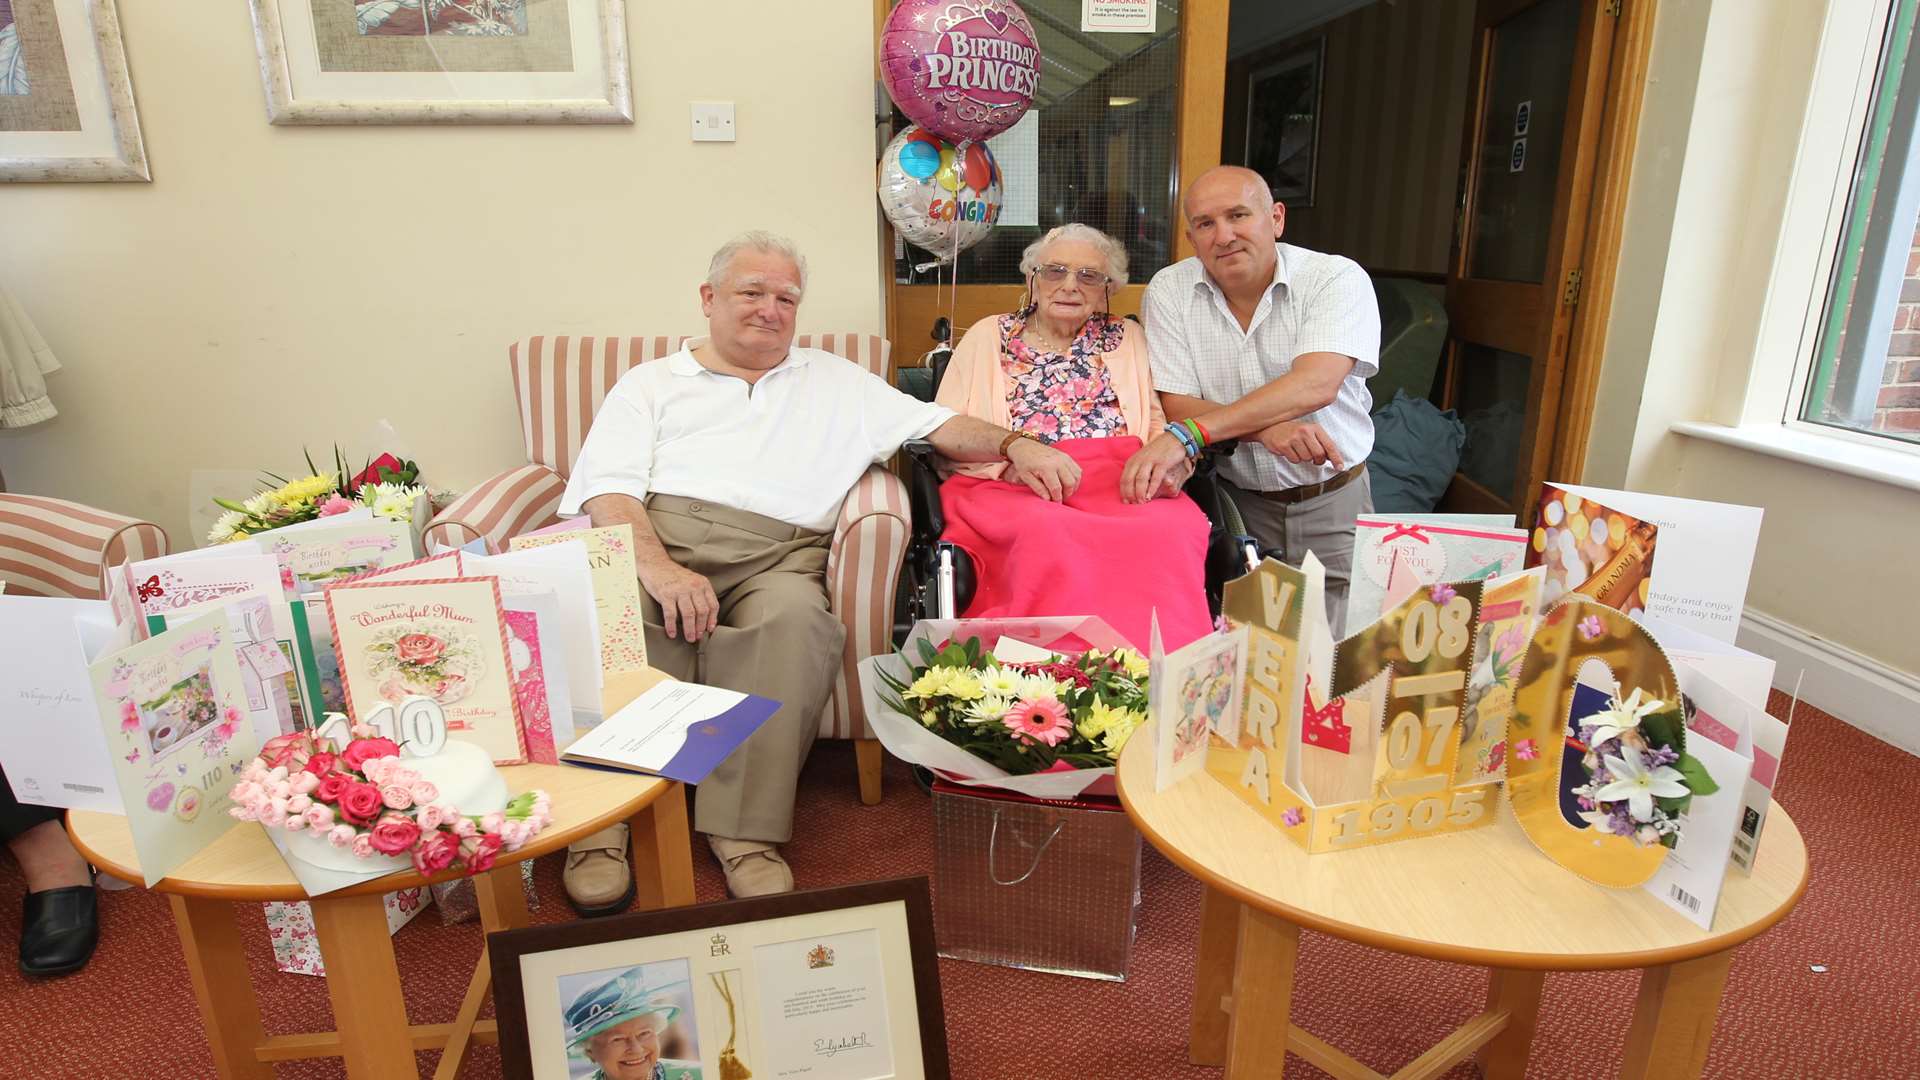 Vera Pigott, celebrates her 110th birthday with from left, Graham Pigott, son and Kevin Lee, grandson at Sutton Valence Care Home. Picture: John Westhrop.